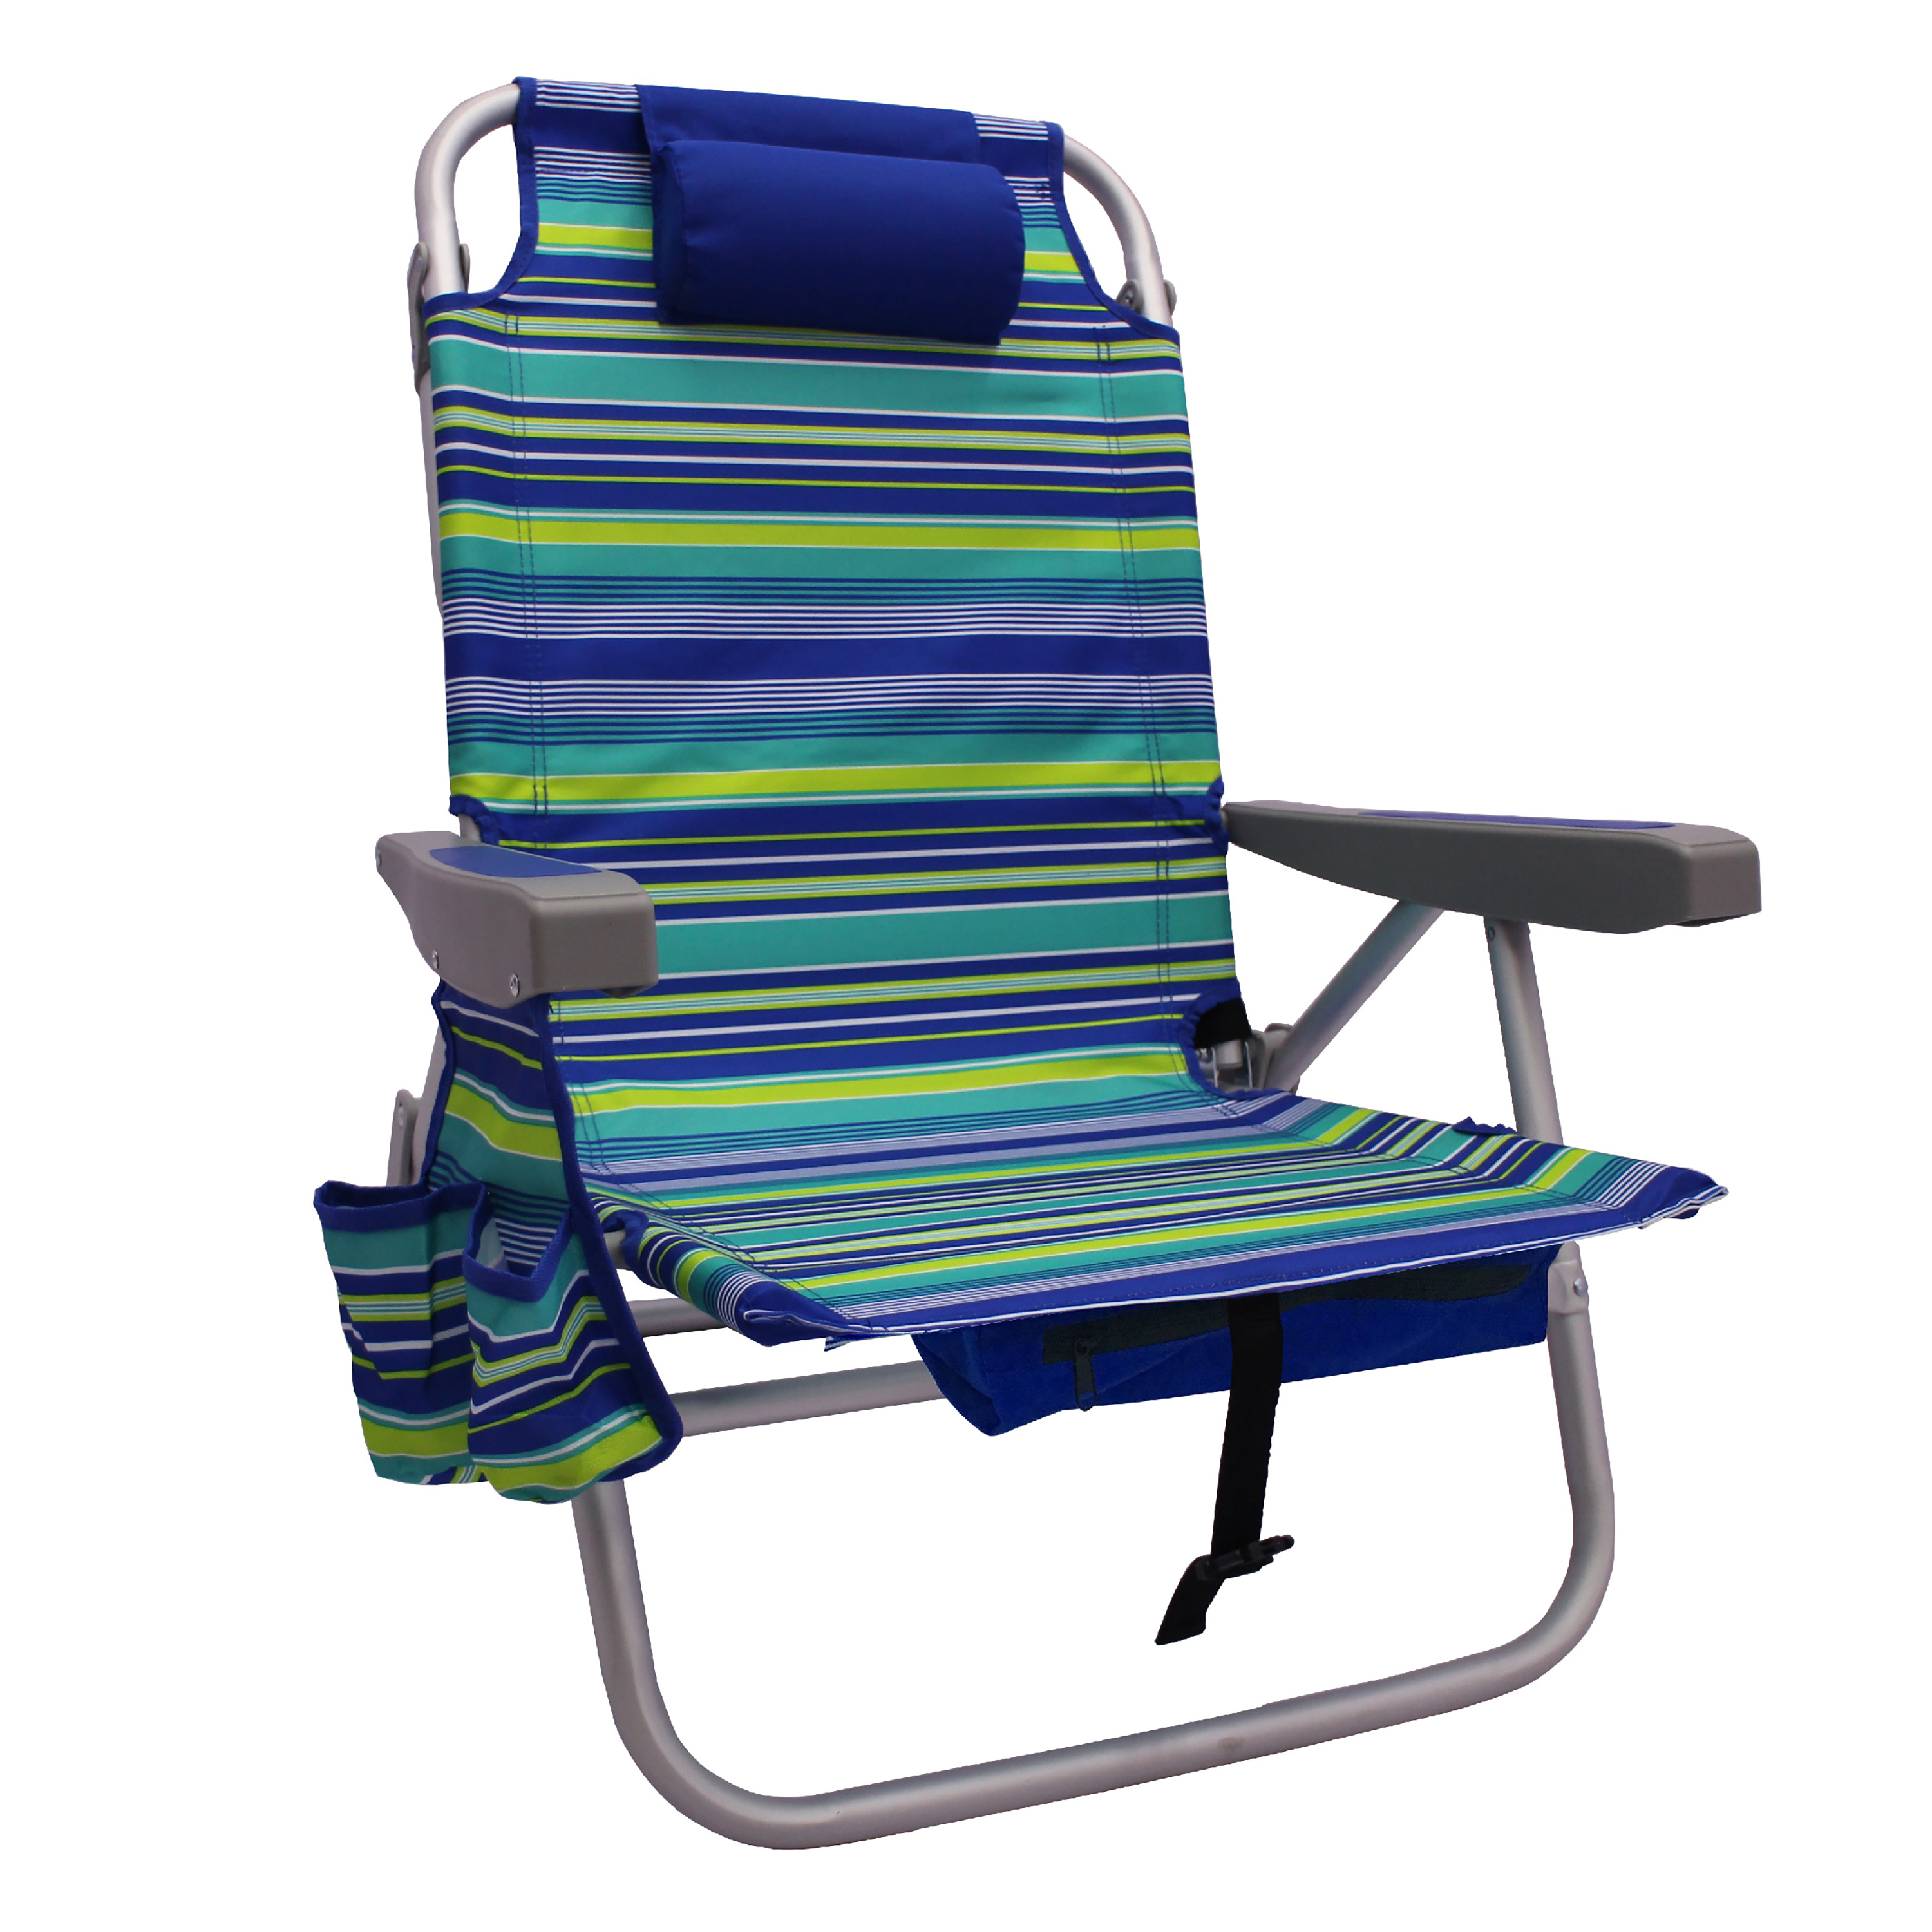 Mainstays Backpack Aluminum Beach Chair, Multi-color - image 3 of 11